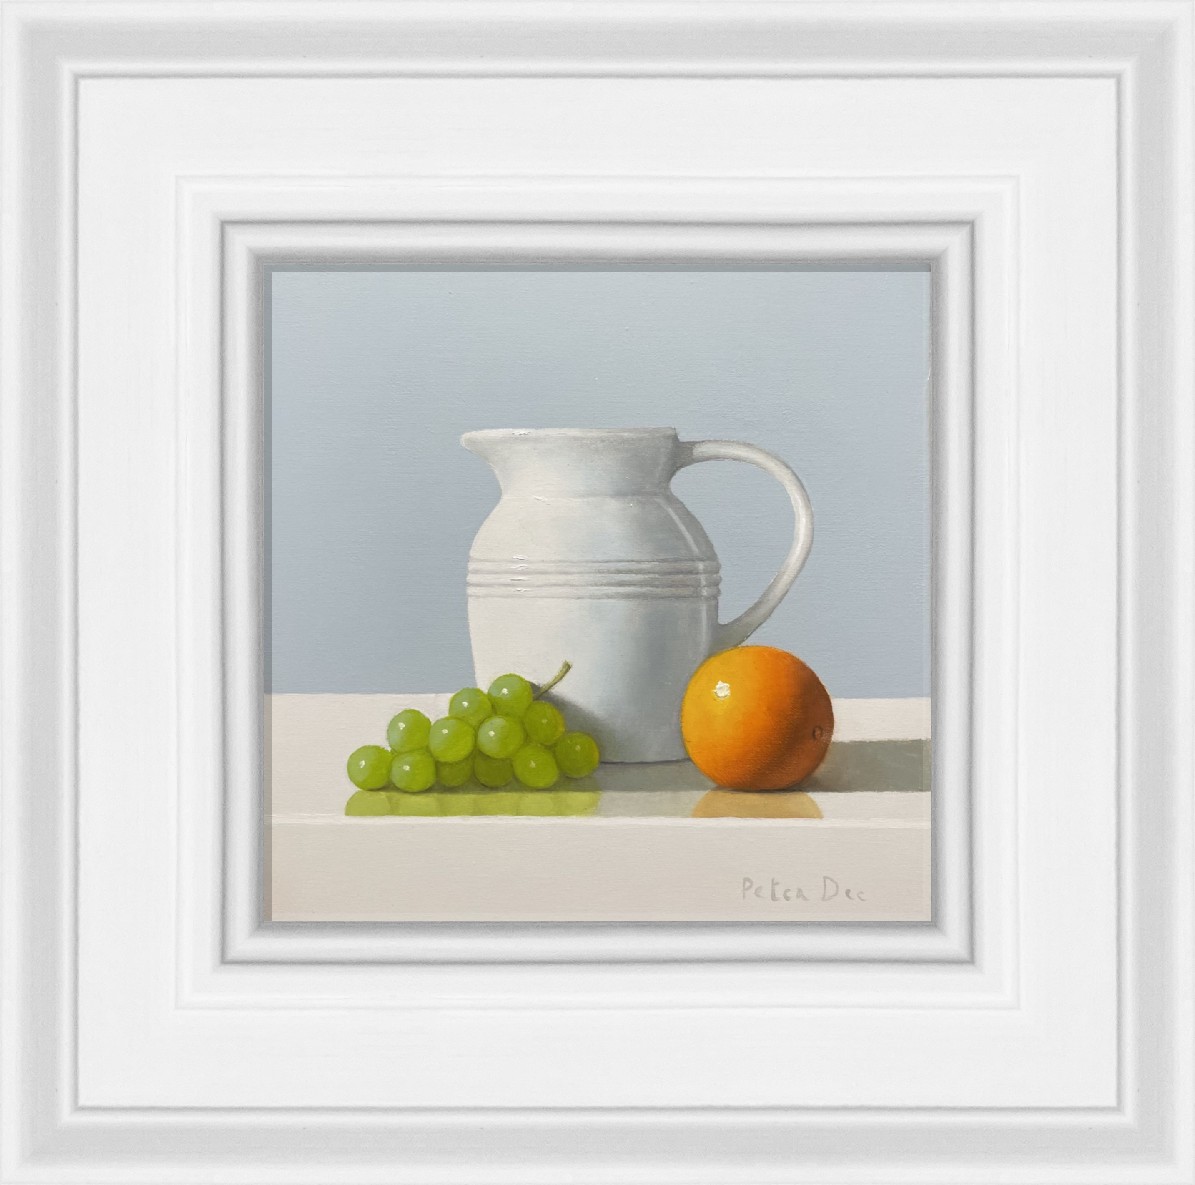 Ceramic Jug with Orange and Grapes  by Peter Dee